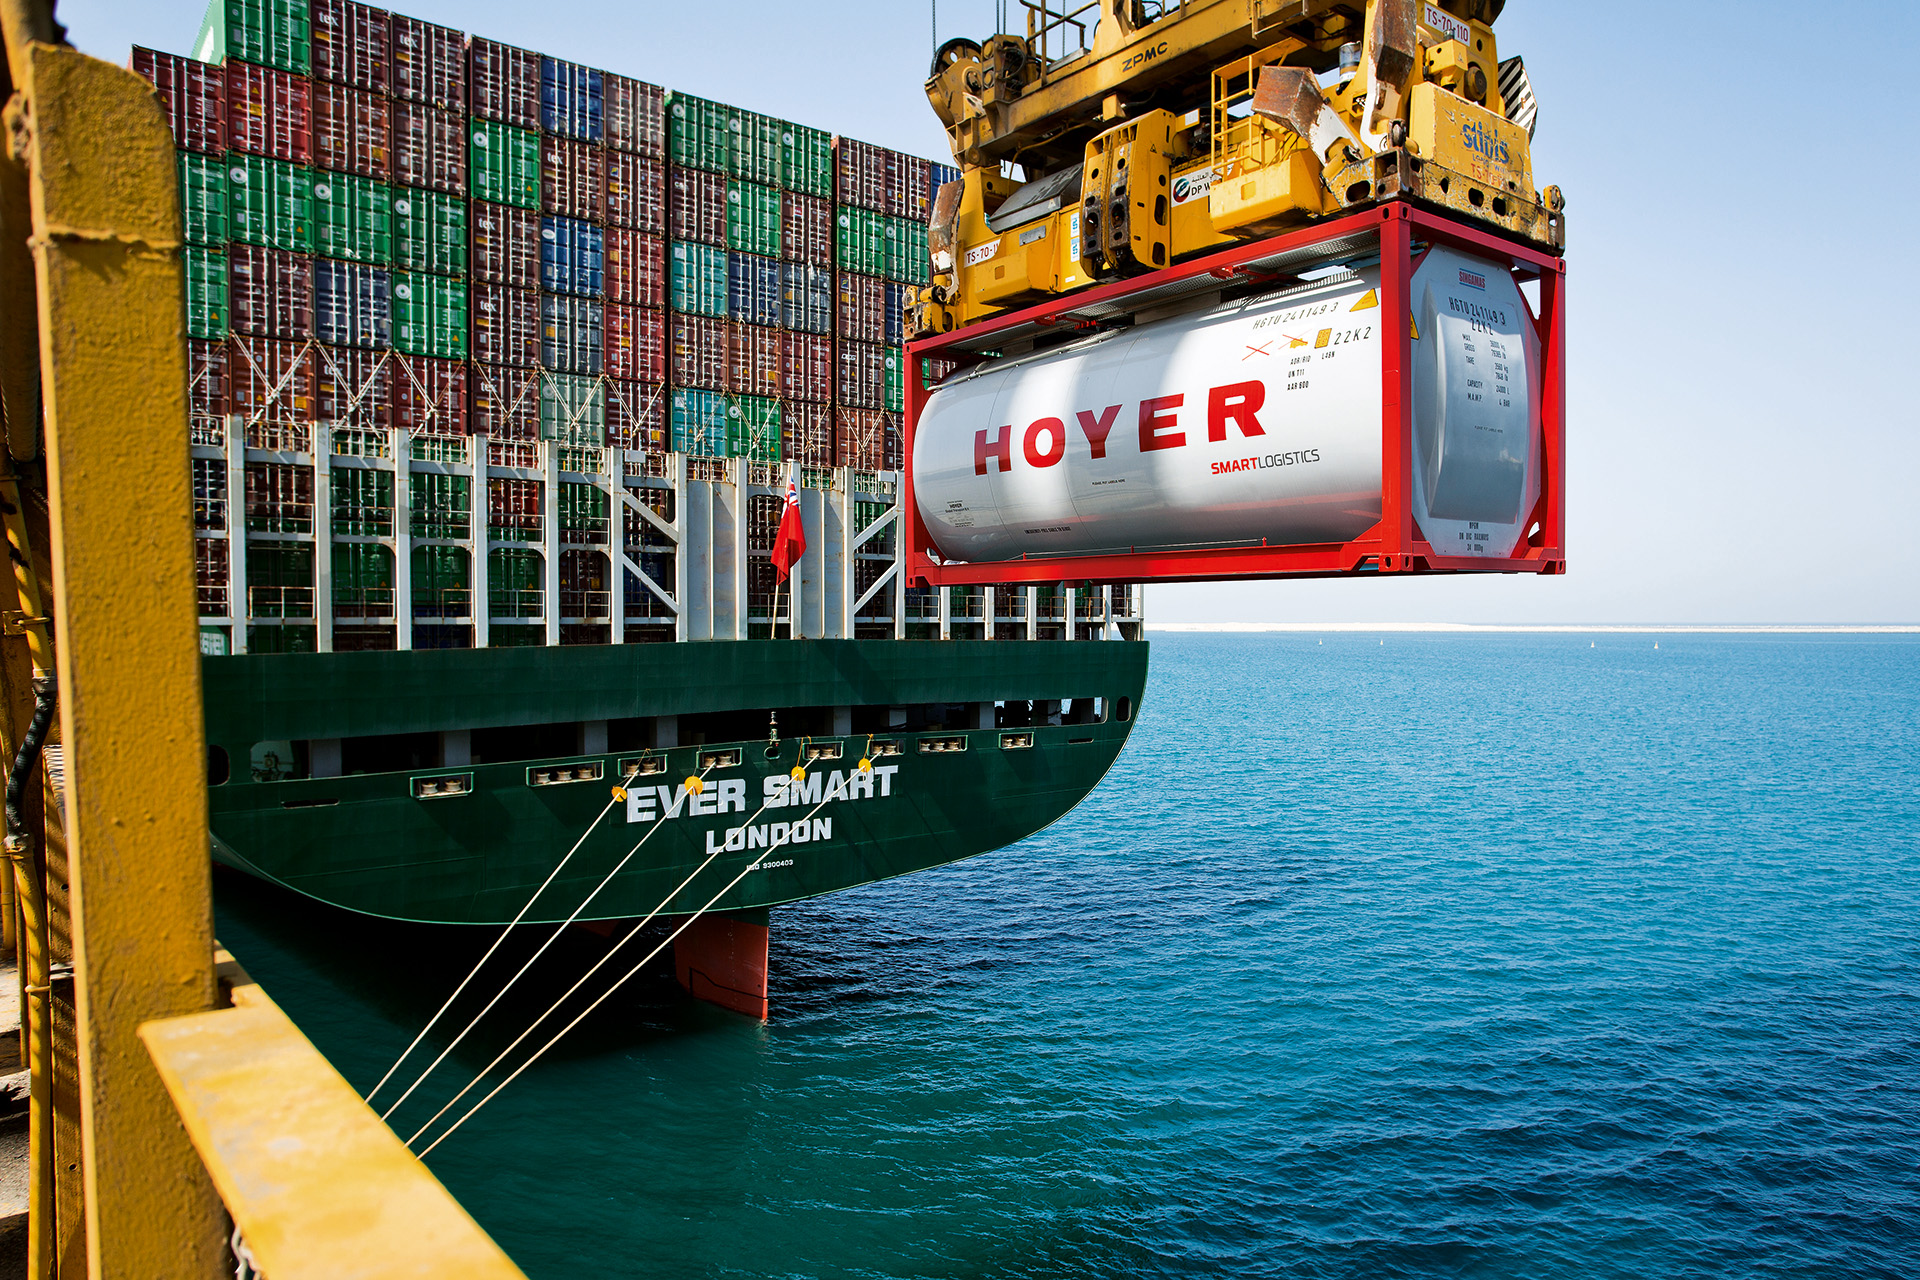 HOYER container smart logistics on a crane at the harbour, ship in the background